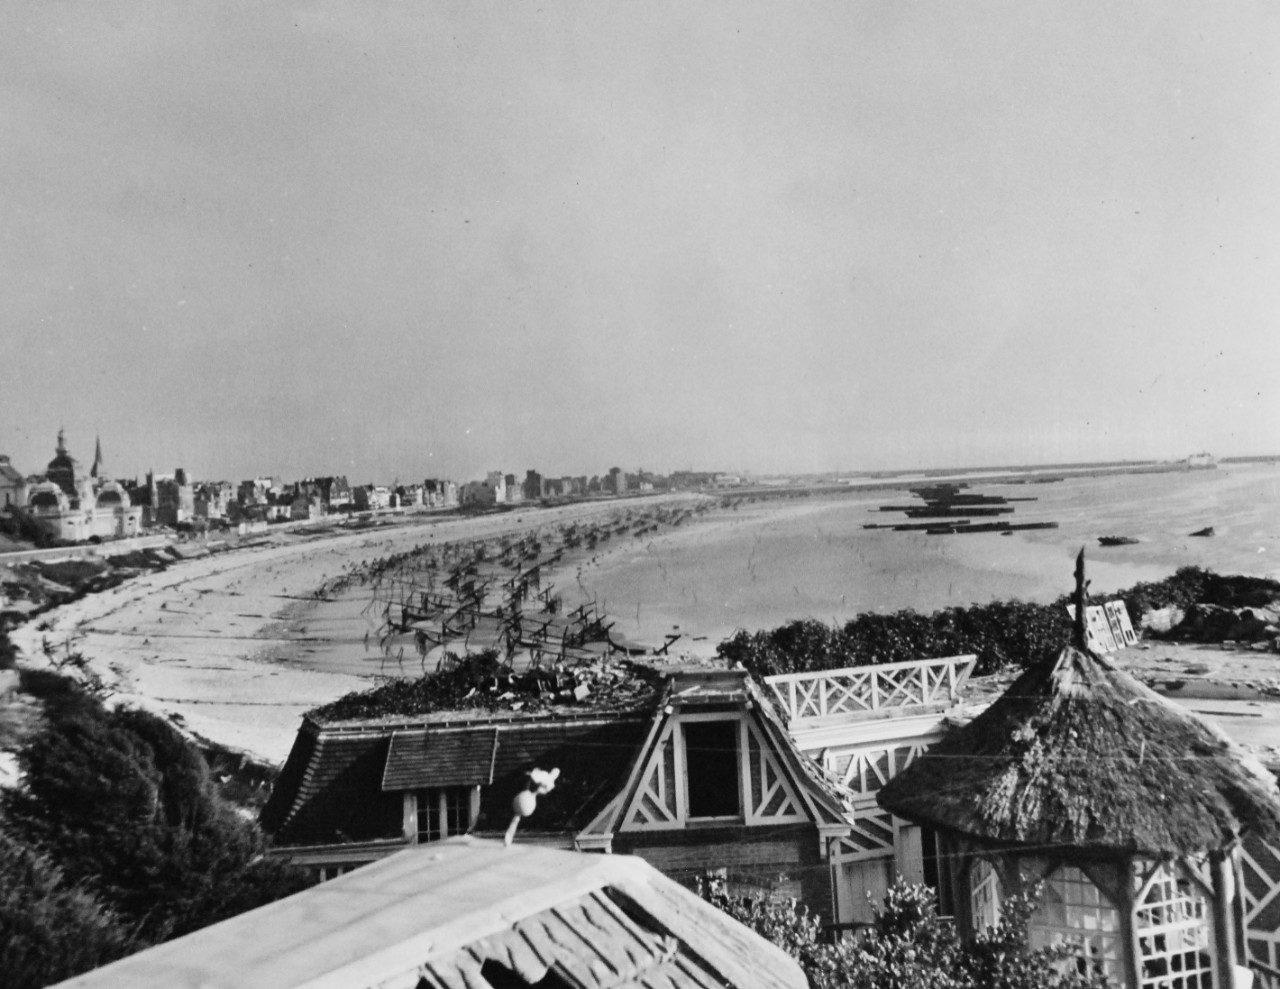 80-G-257306:  Invasion of France, Le Havre, August-September 1944.   German demolition and fierce bombardment by Allies wrought destruction on waterfront of Le Havre, France, recently liberated.   Shown is the beach, studded with obstacles that resemble a junkyard, 22 September 1944.   Official U.S. Navy Photograph, now in the collection of the National Archives.   (2014/10/28).  